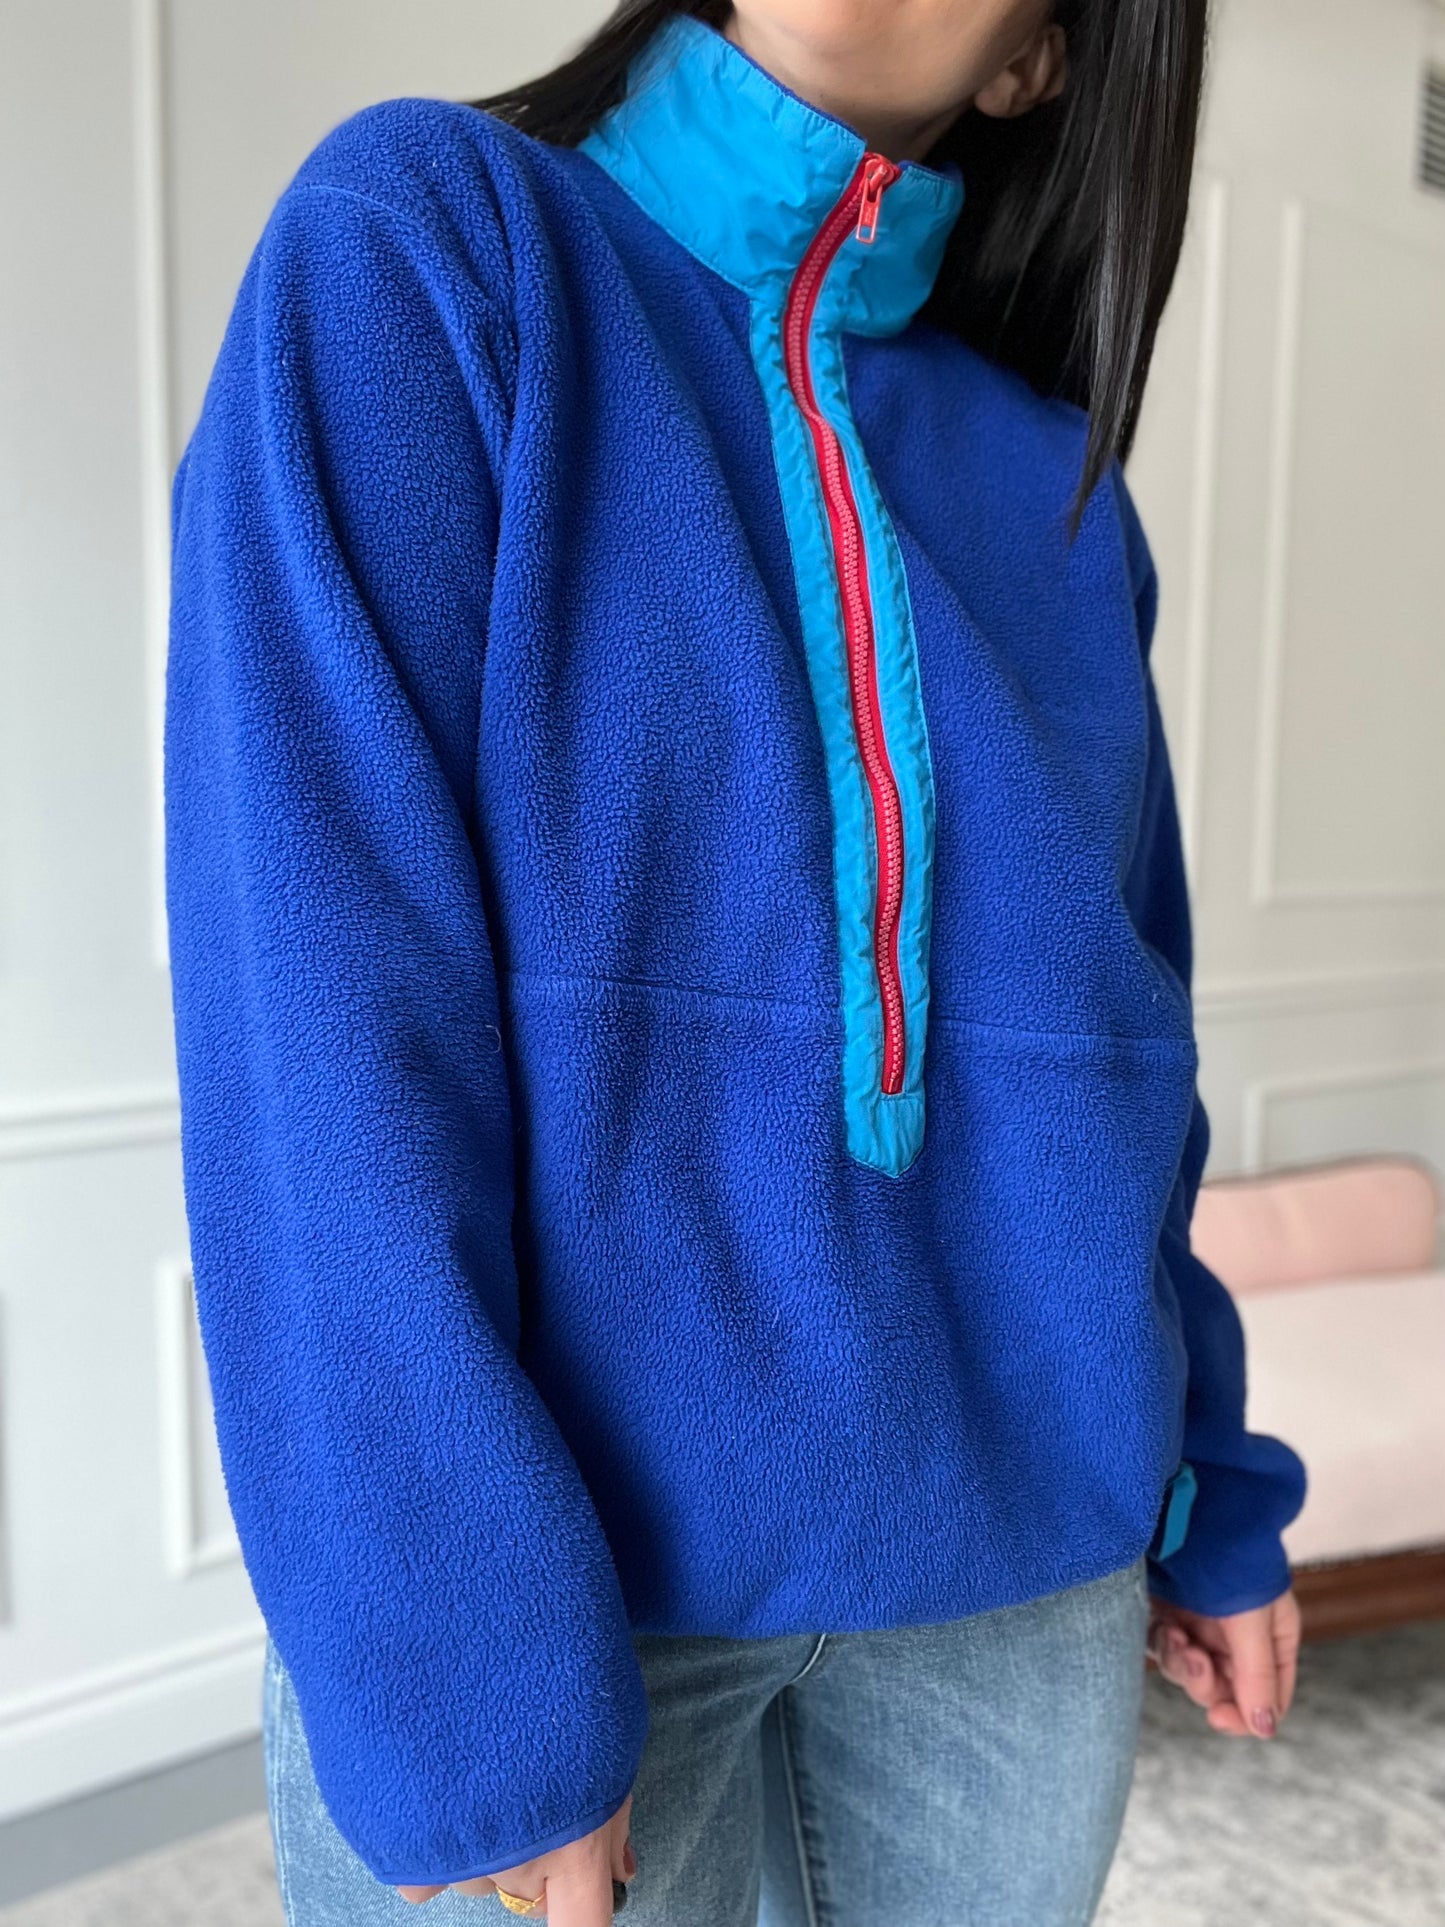 90s Patagonia Fleece Pullover - Size XL